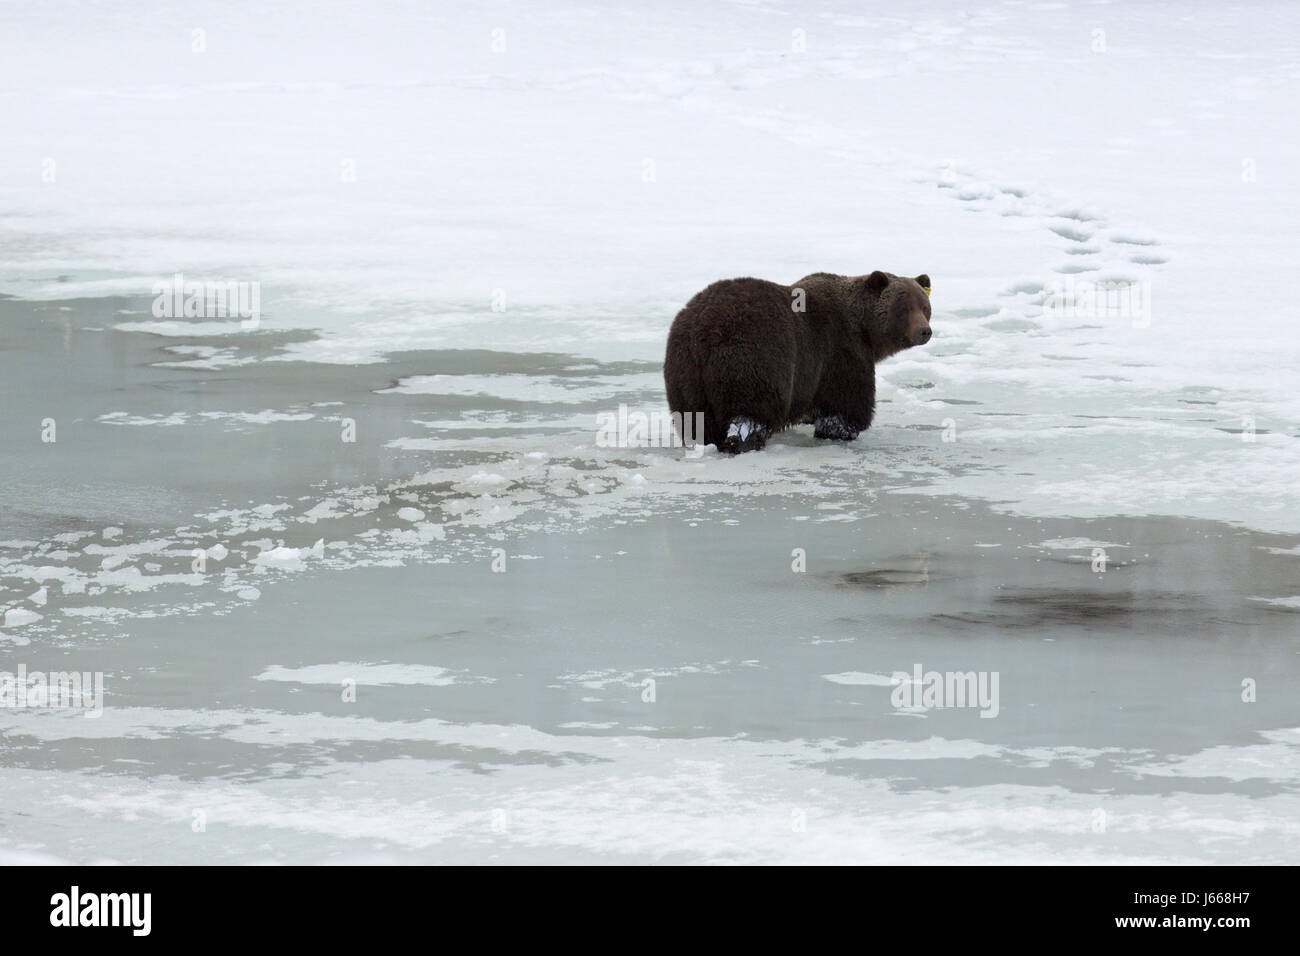 Grizzly bear (Ursus arctos horribilis) crossing a semi-frozen lake in Alberta, Canada. The bear has just emerged from hibernation. Stock Photo